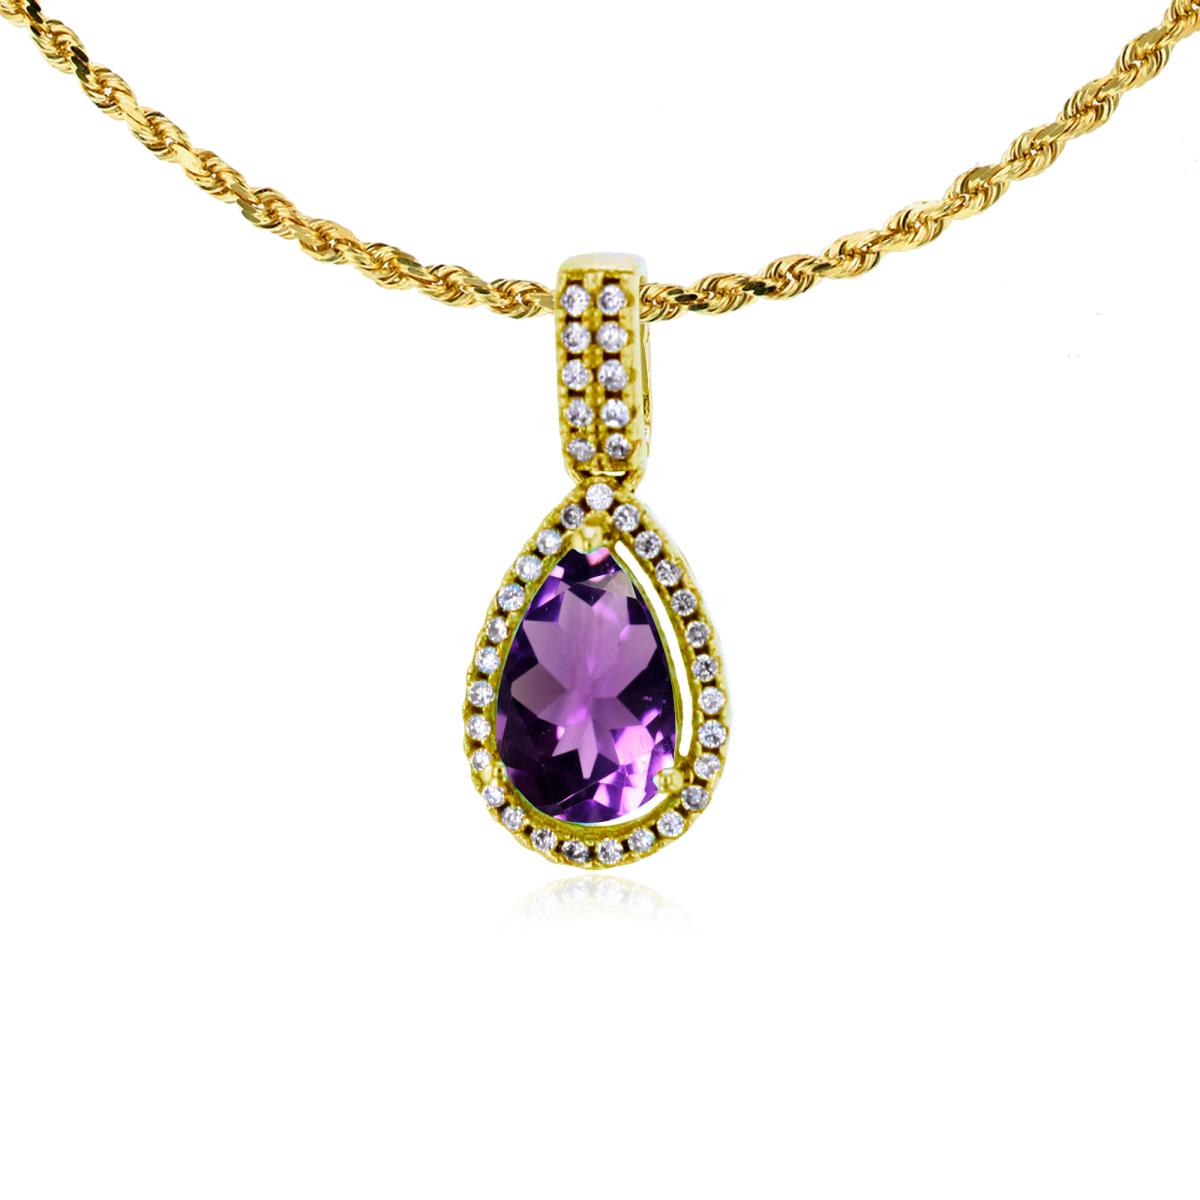 10K Yellow Gold 8x5mm Pear Cut Amethyst & 0.11 CTTW Diamond Halo 18" Rope Chain Necklace